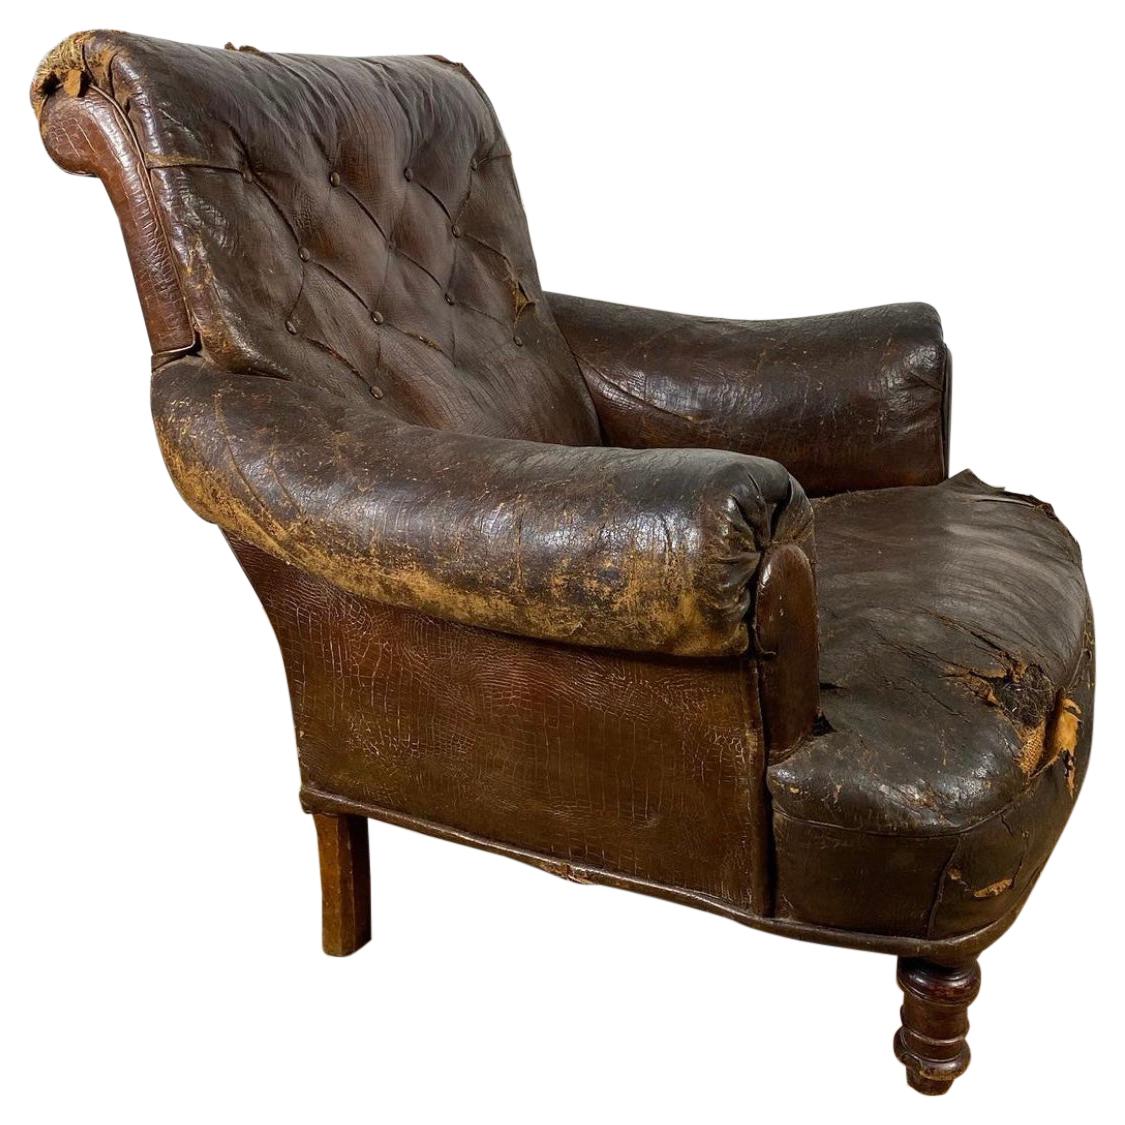 Early 19thC French Crocodile Leather Armchair, c.1830 For Sale